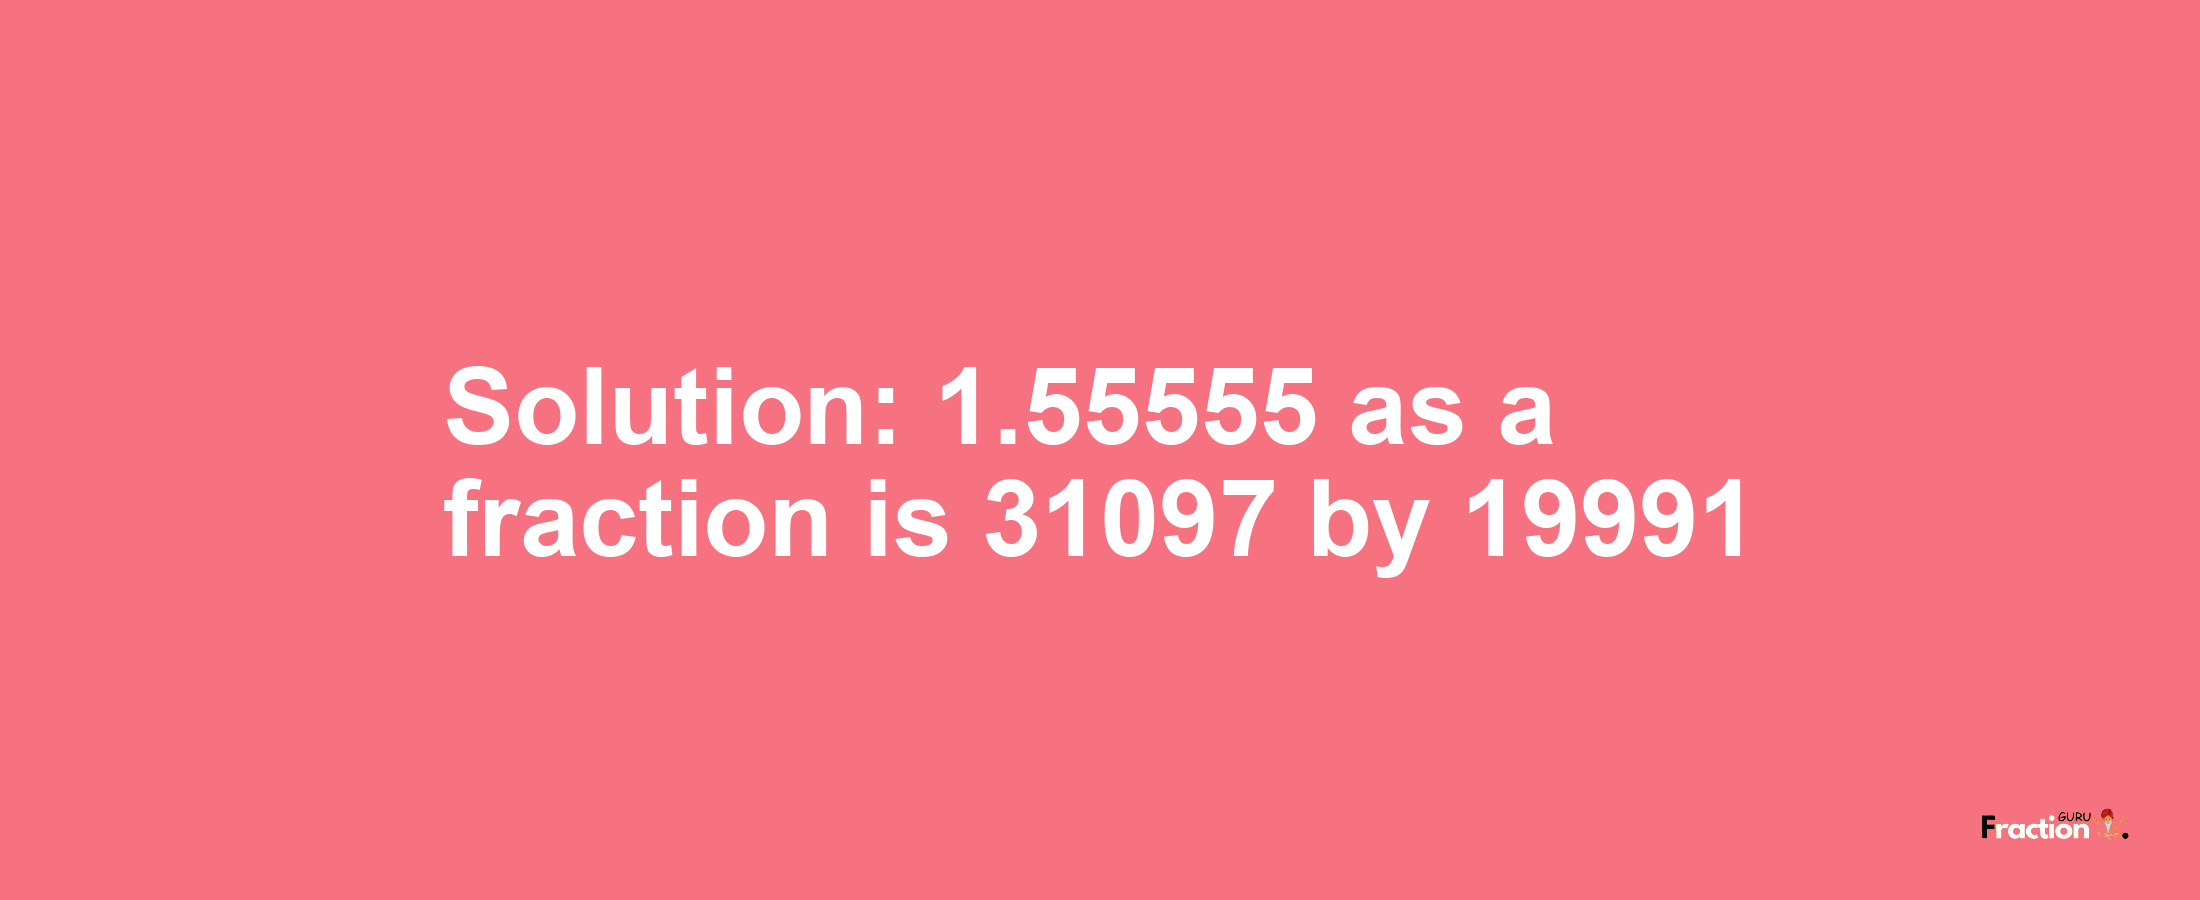 Solution:1.55555 as a fraction is 31097/19991